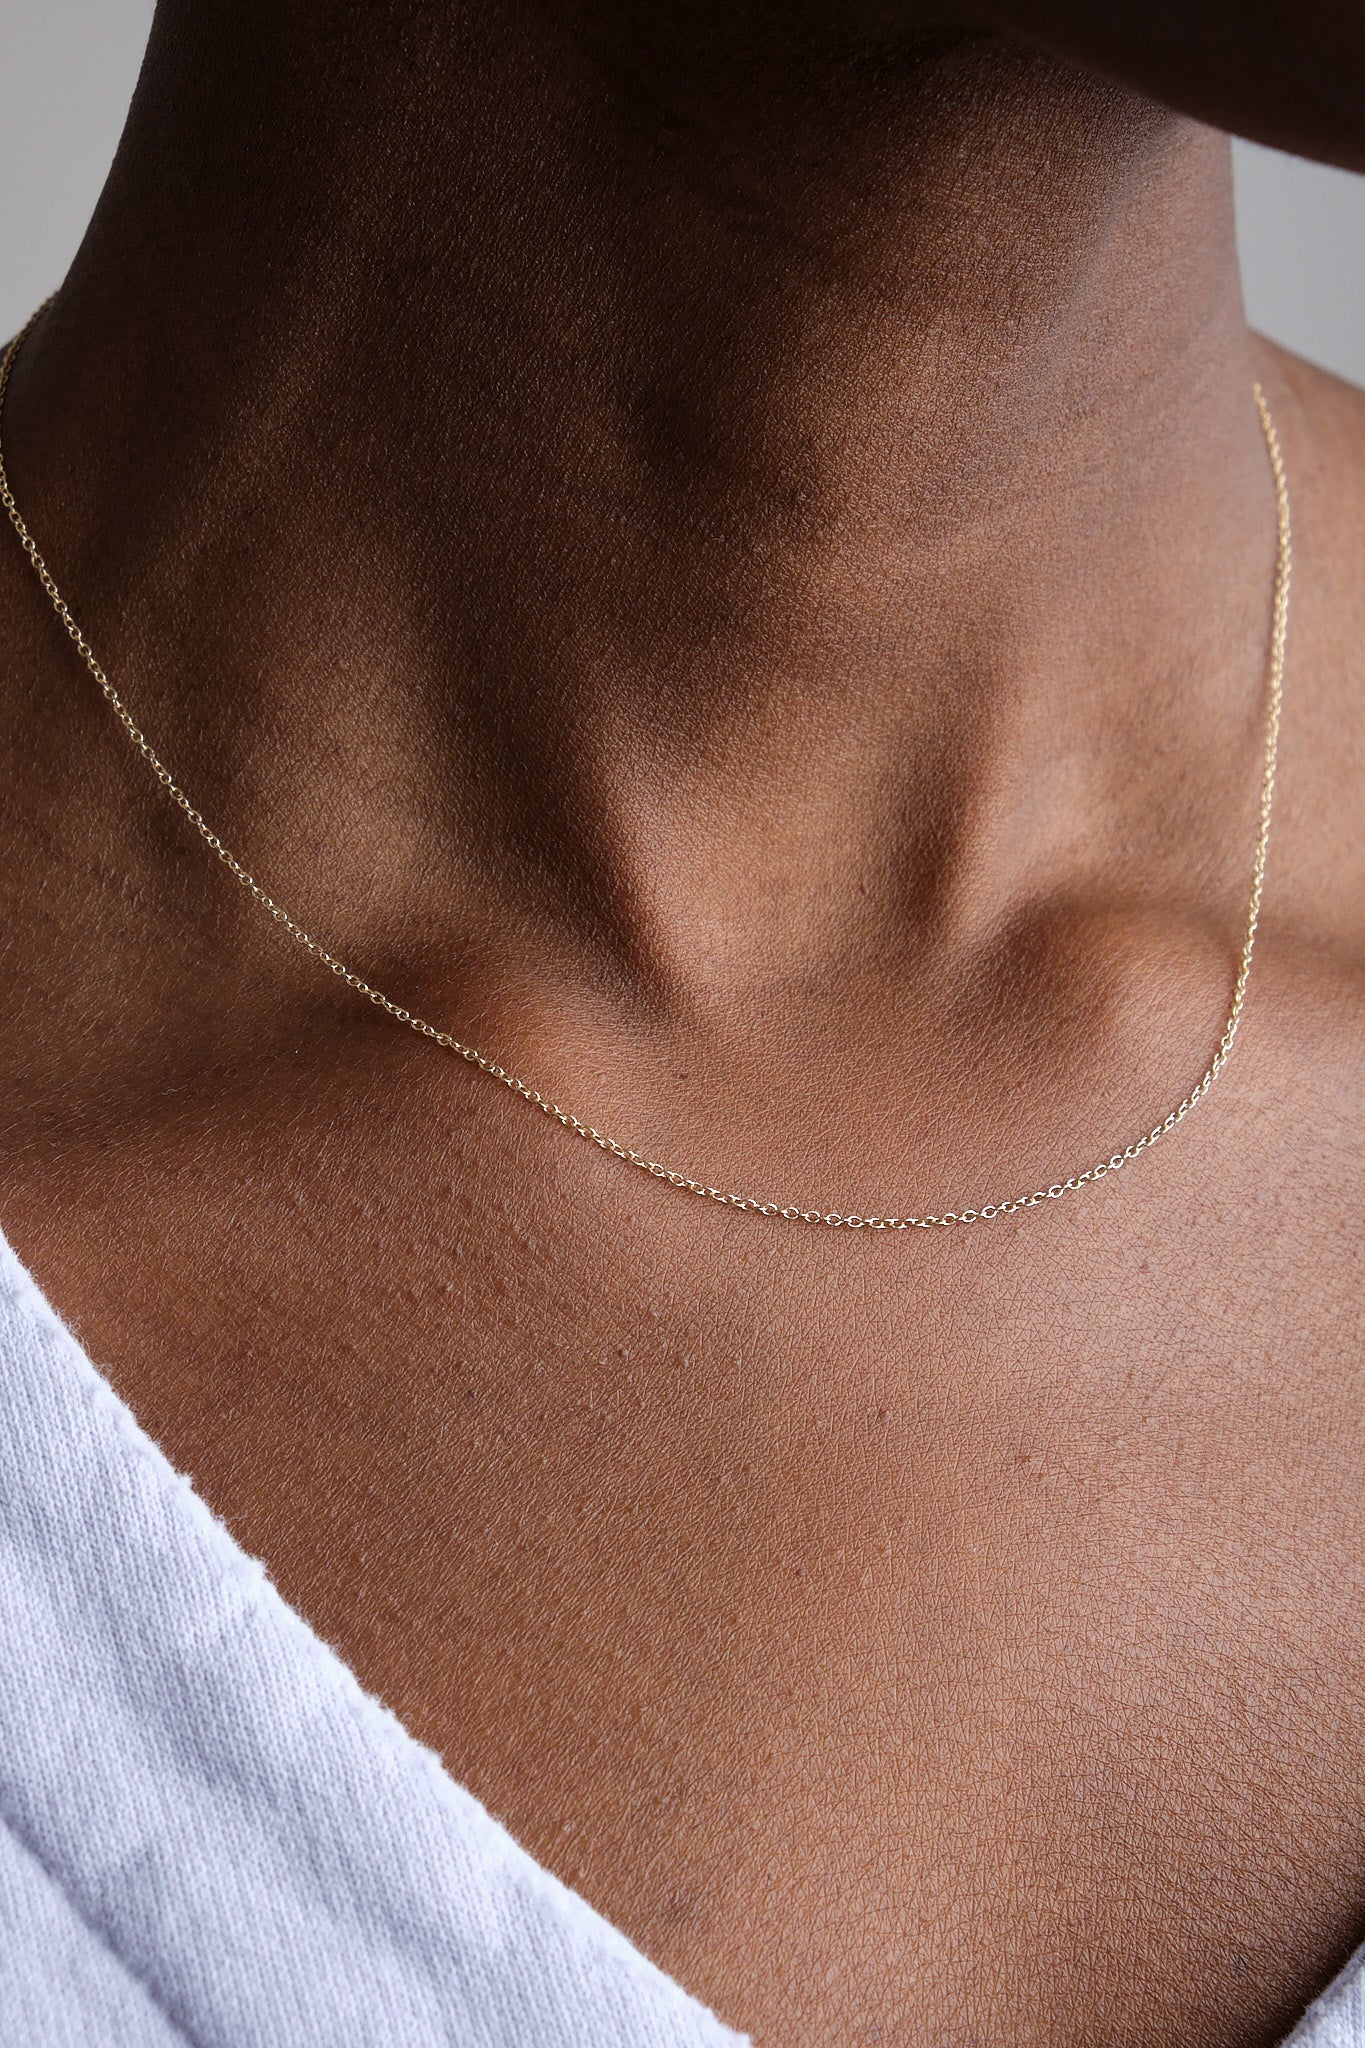 Kathleen Whitaker Thin Chain Necklace in gold